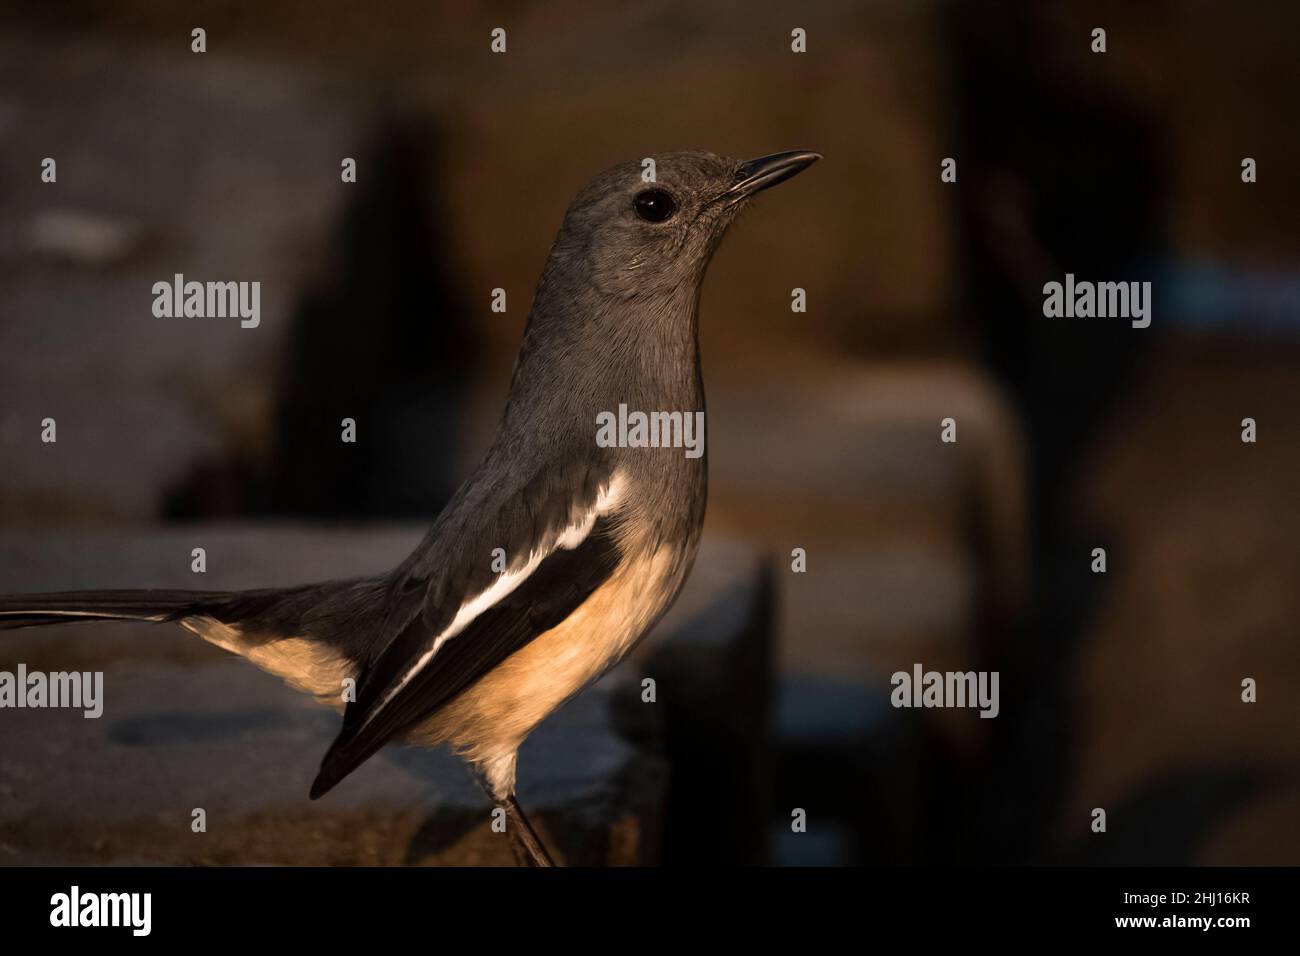 A oriental magpie robin female bird photo with beautiful blurred background Stock Photo